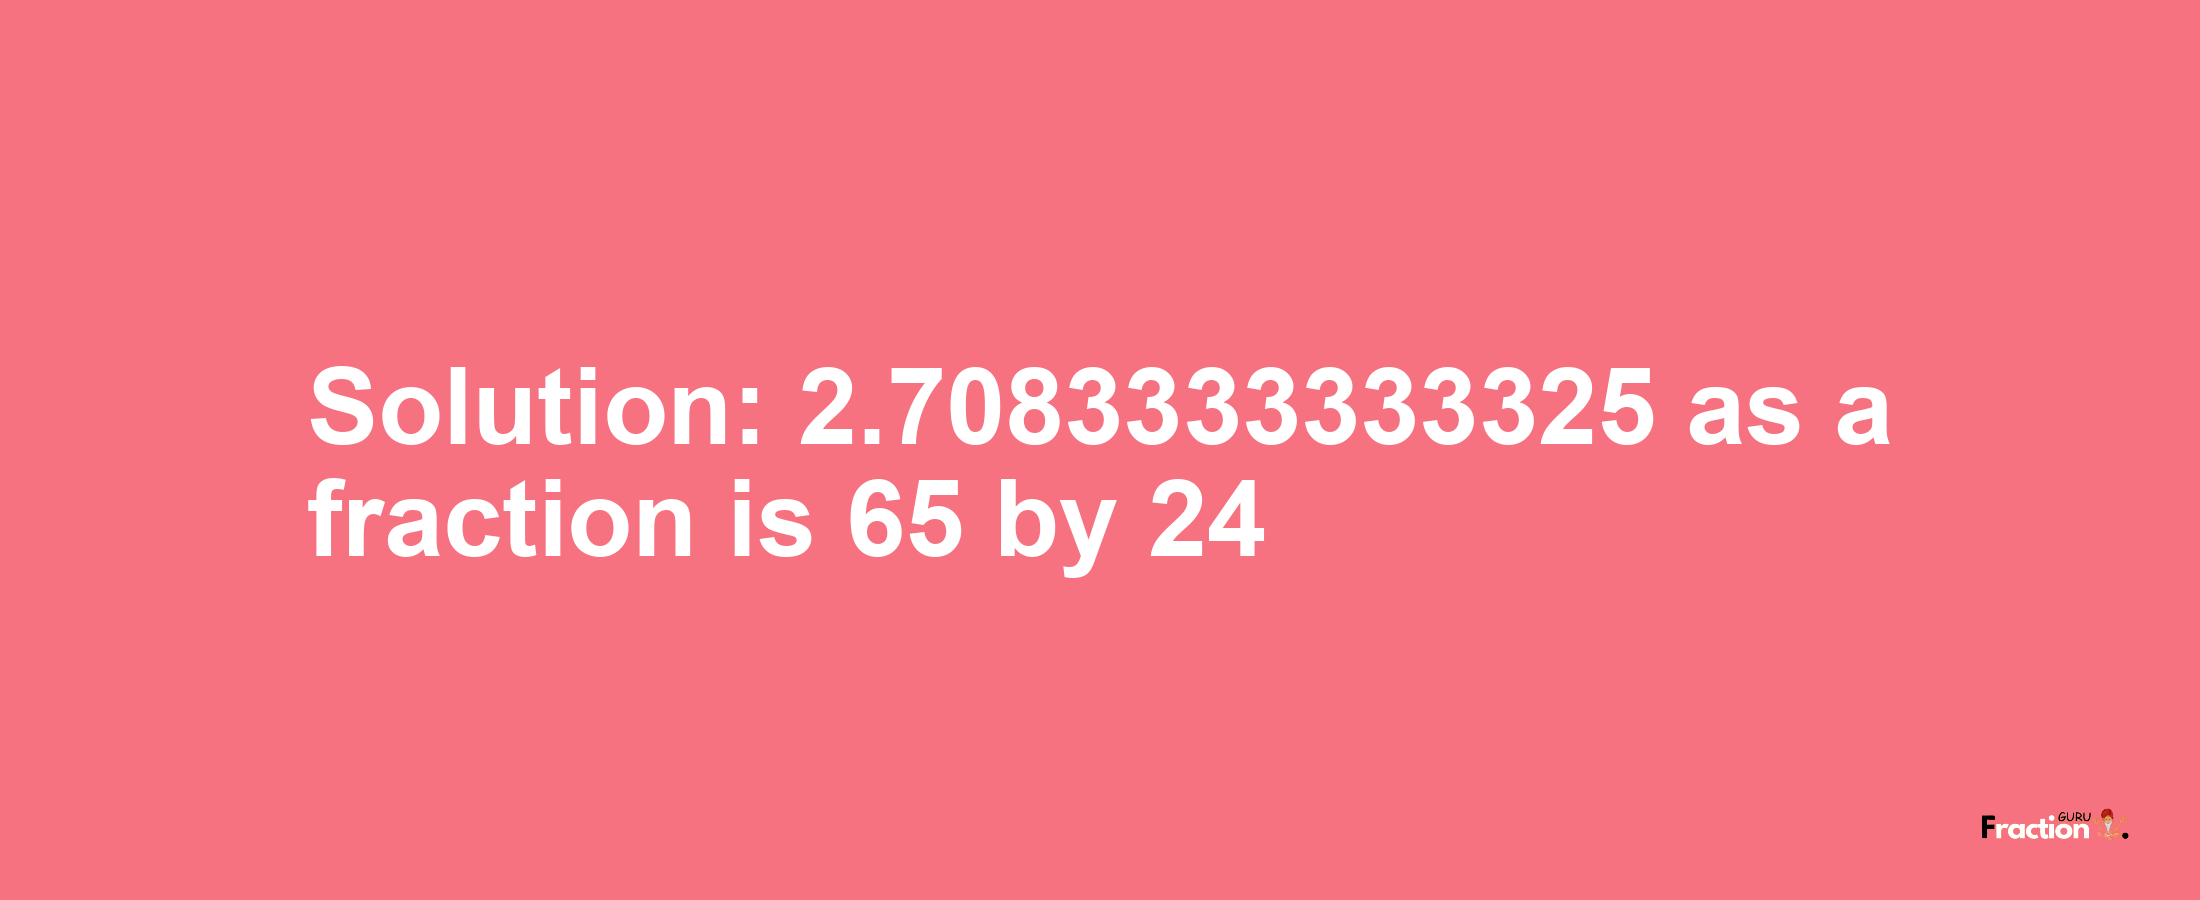 Solution:2.7083333333325 as a fraction is 65/24